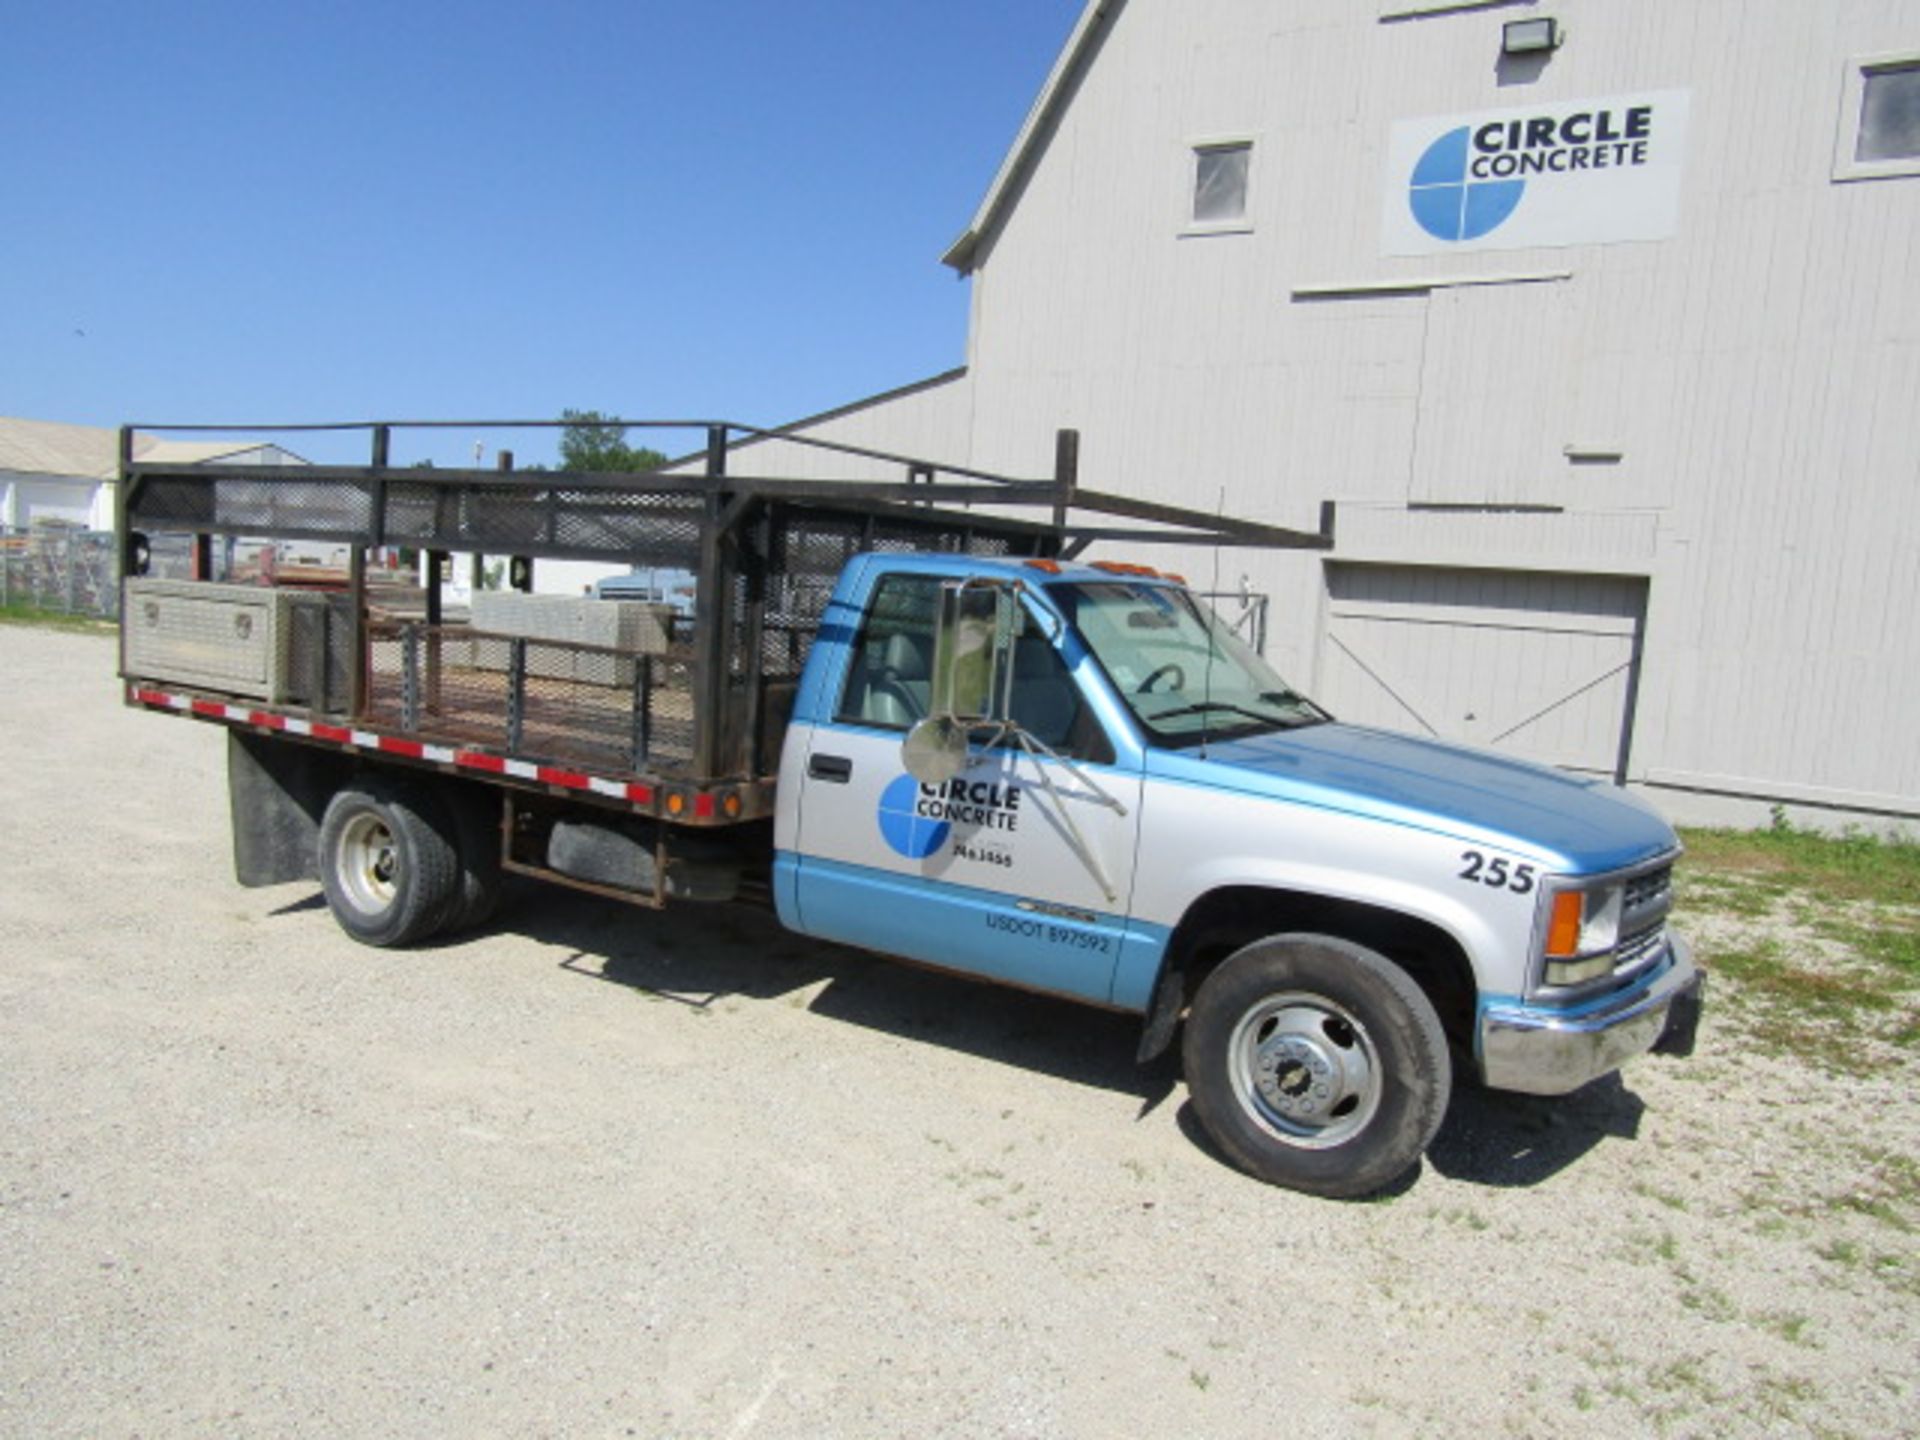 1999 Chevy 3500 Form Pick Up w/Tool Boxes, 9' Bed, Model GMT-400, Dually, VIN #1GBJC34J0XF063255,